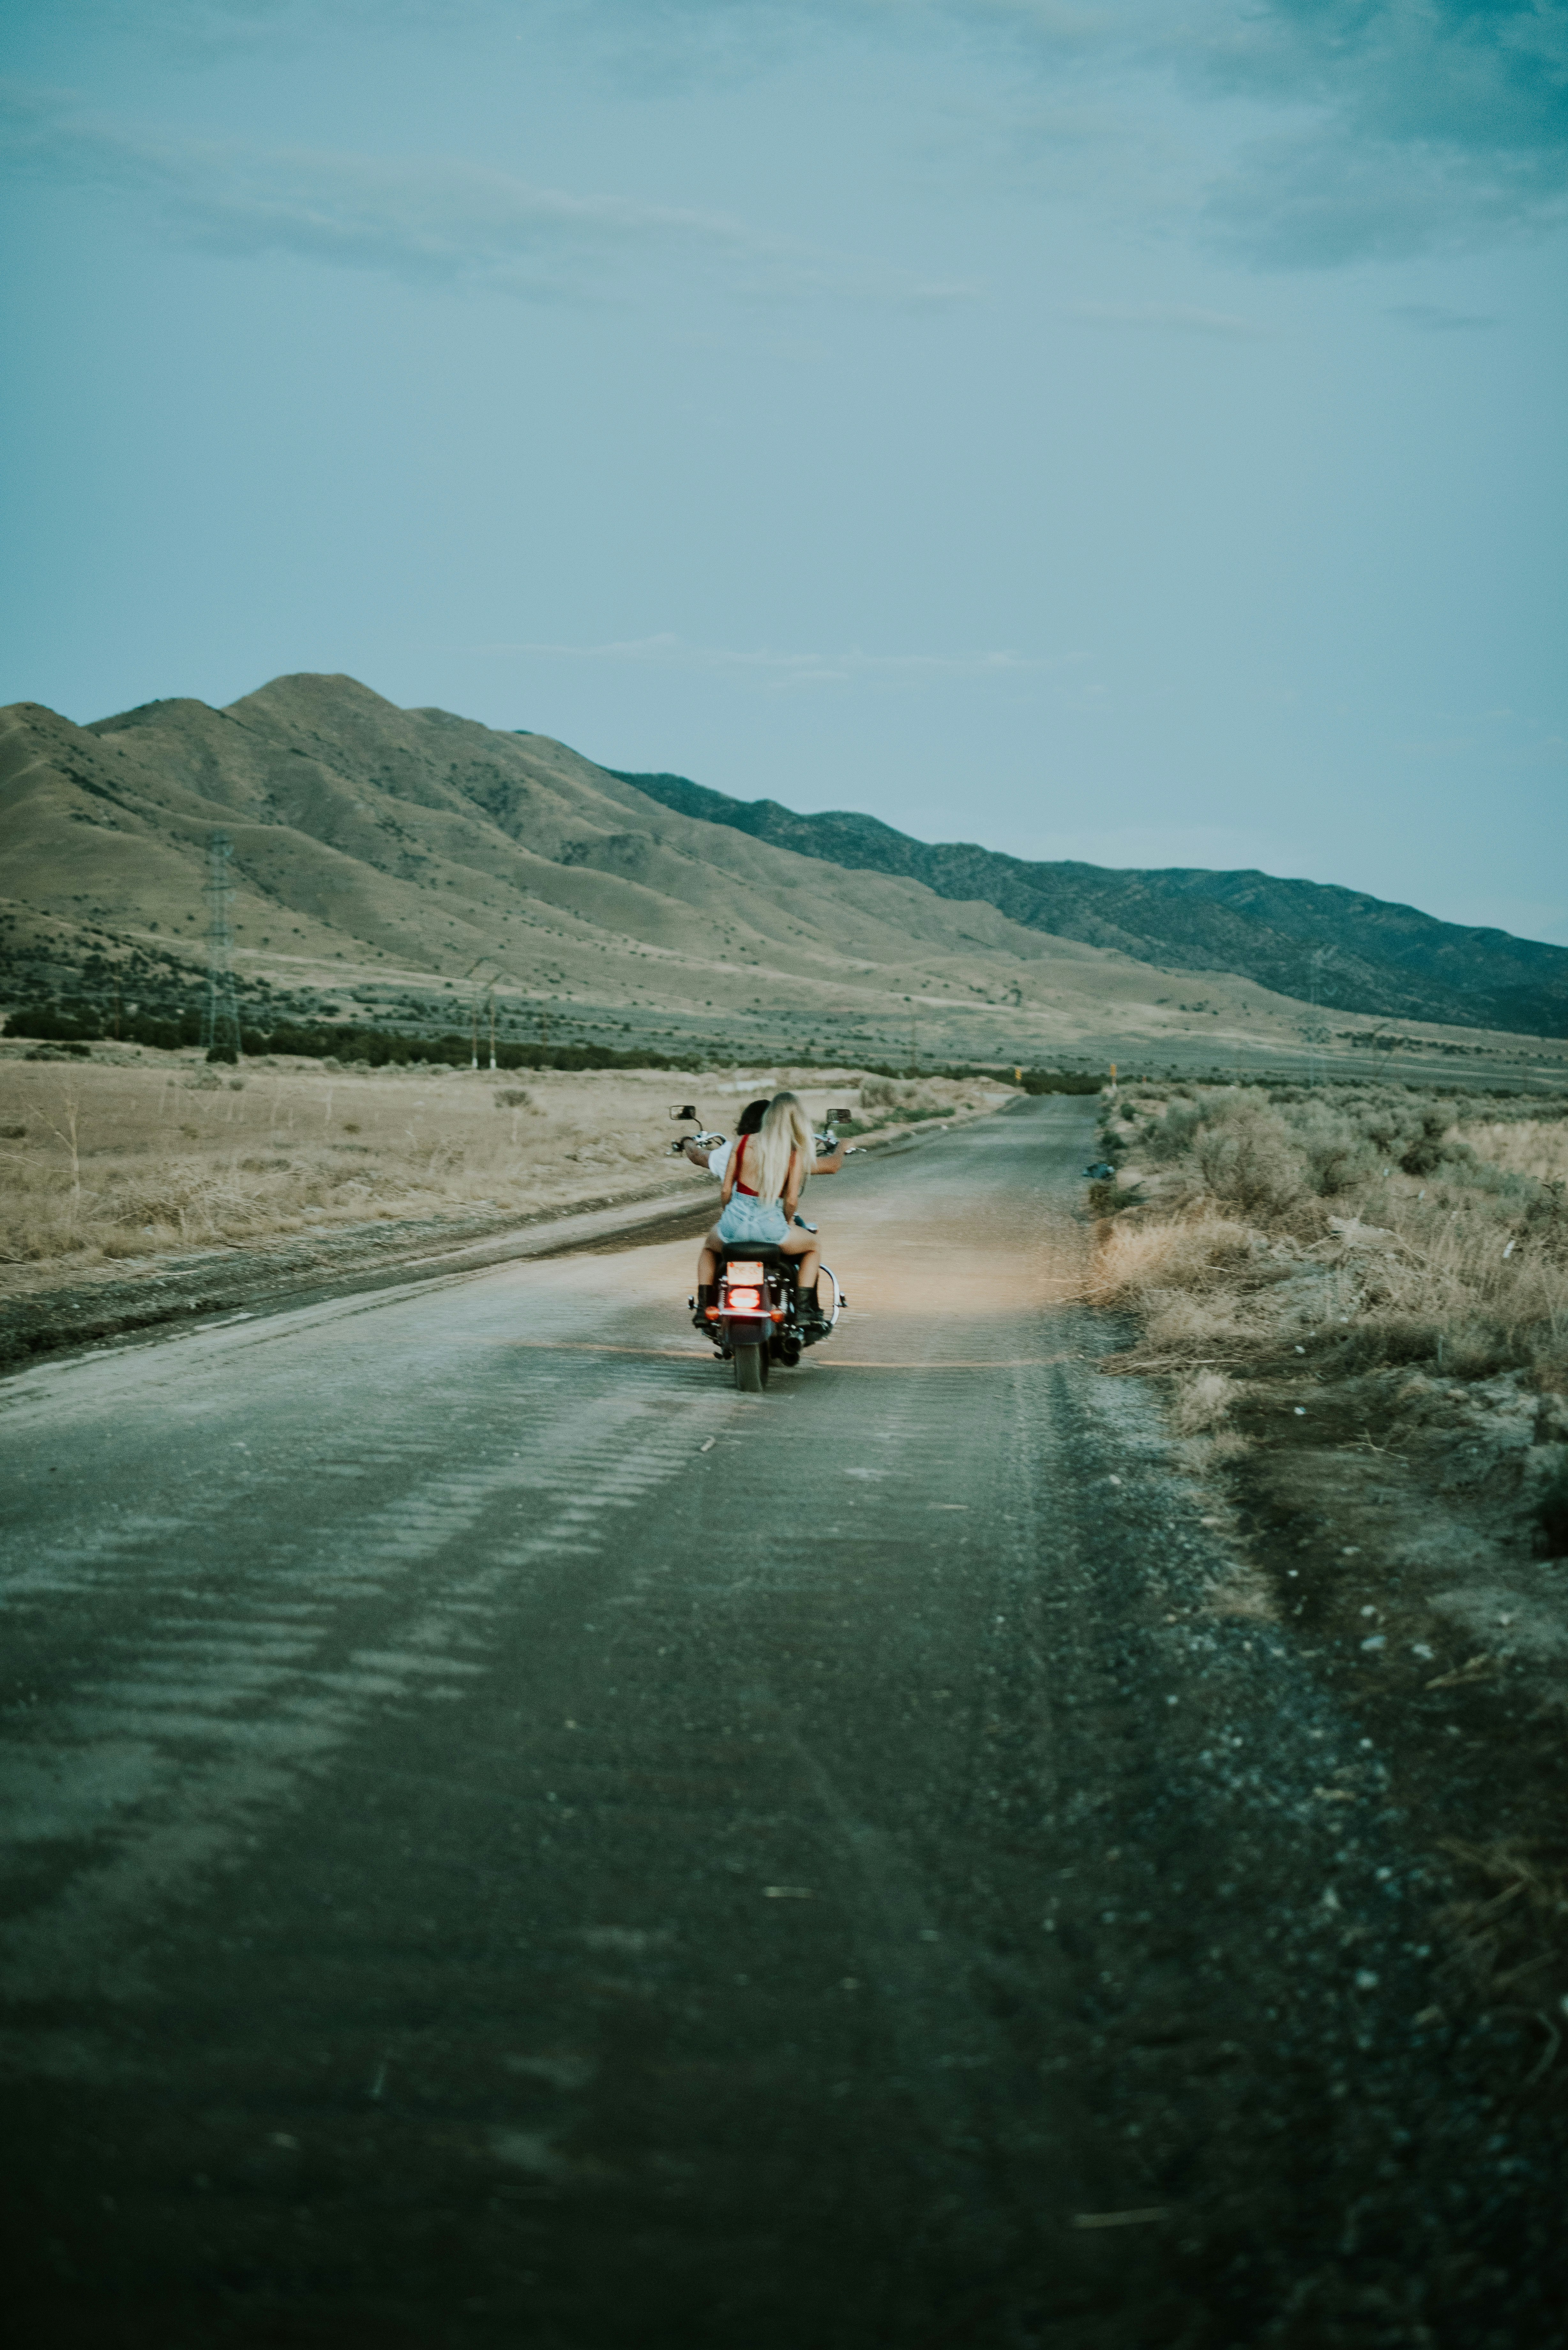 two person riding motorcycle on road viewing mountain